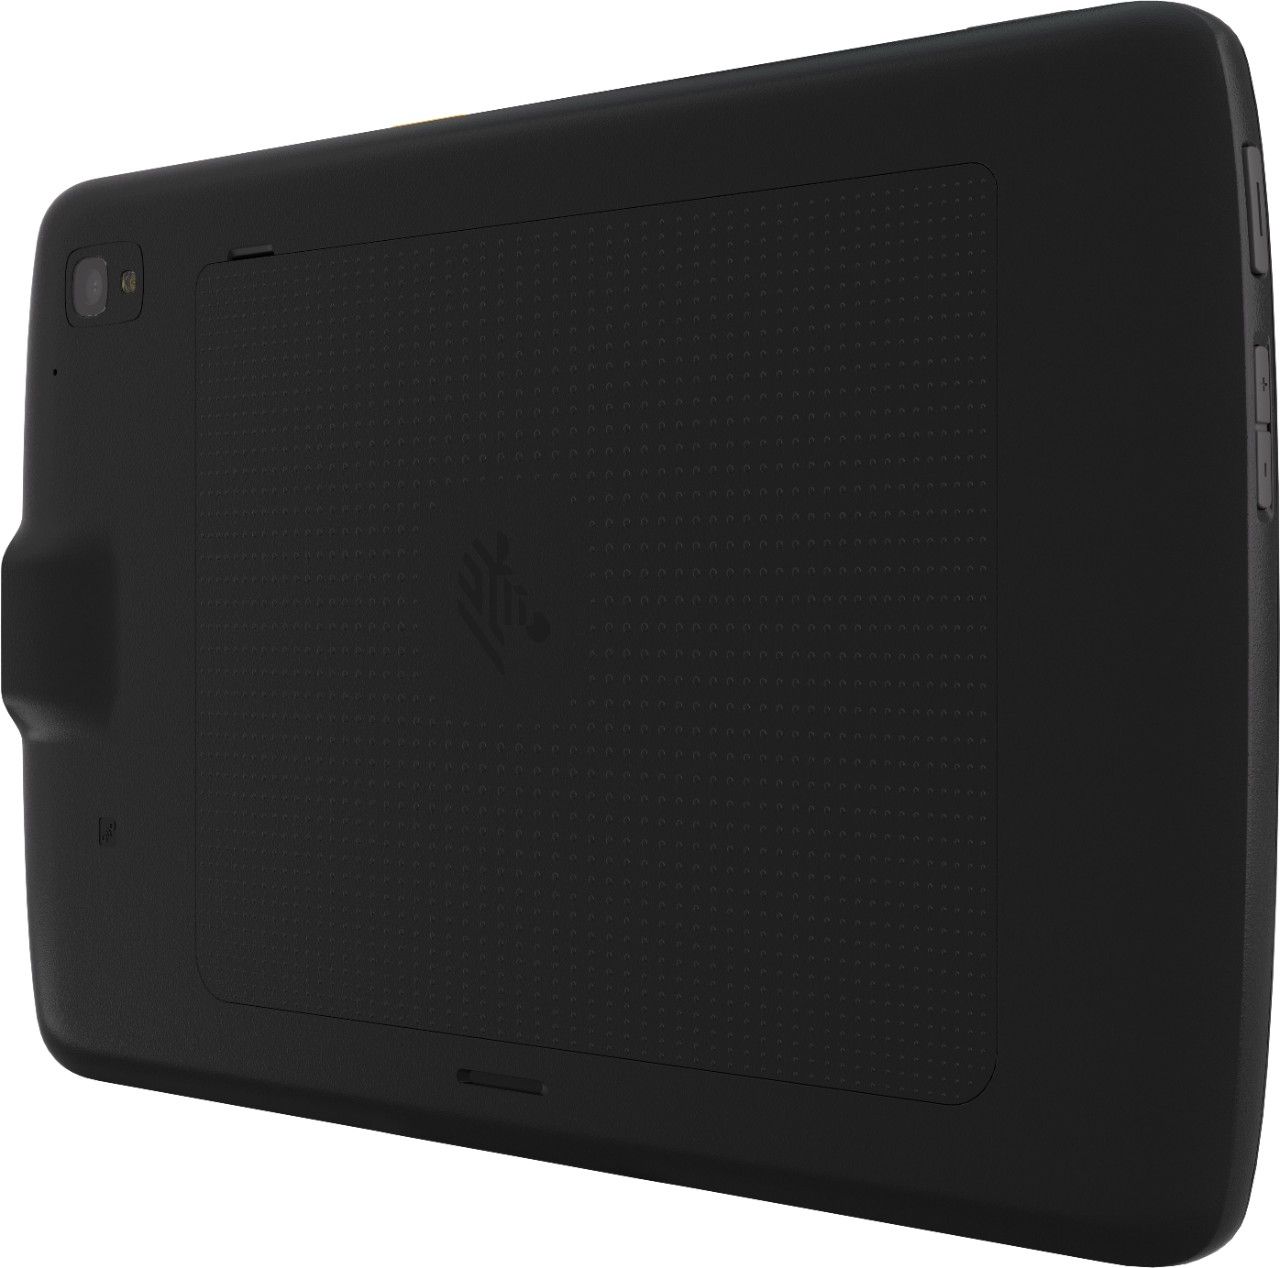 Zebra ET40 Wi-Fi Only Android Rugged Tablet